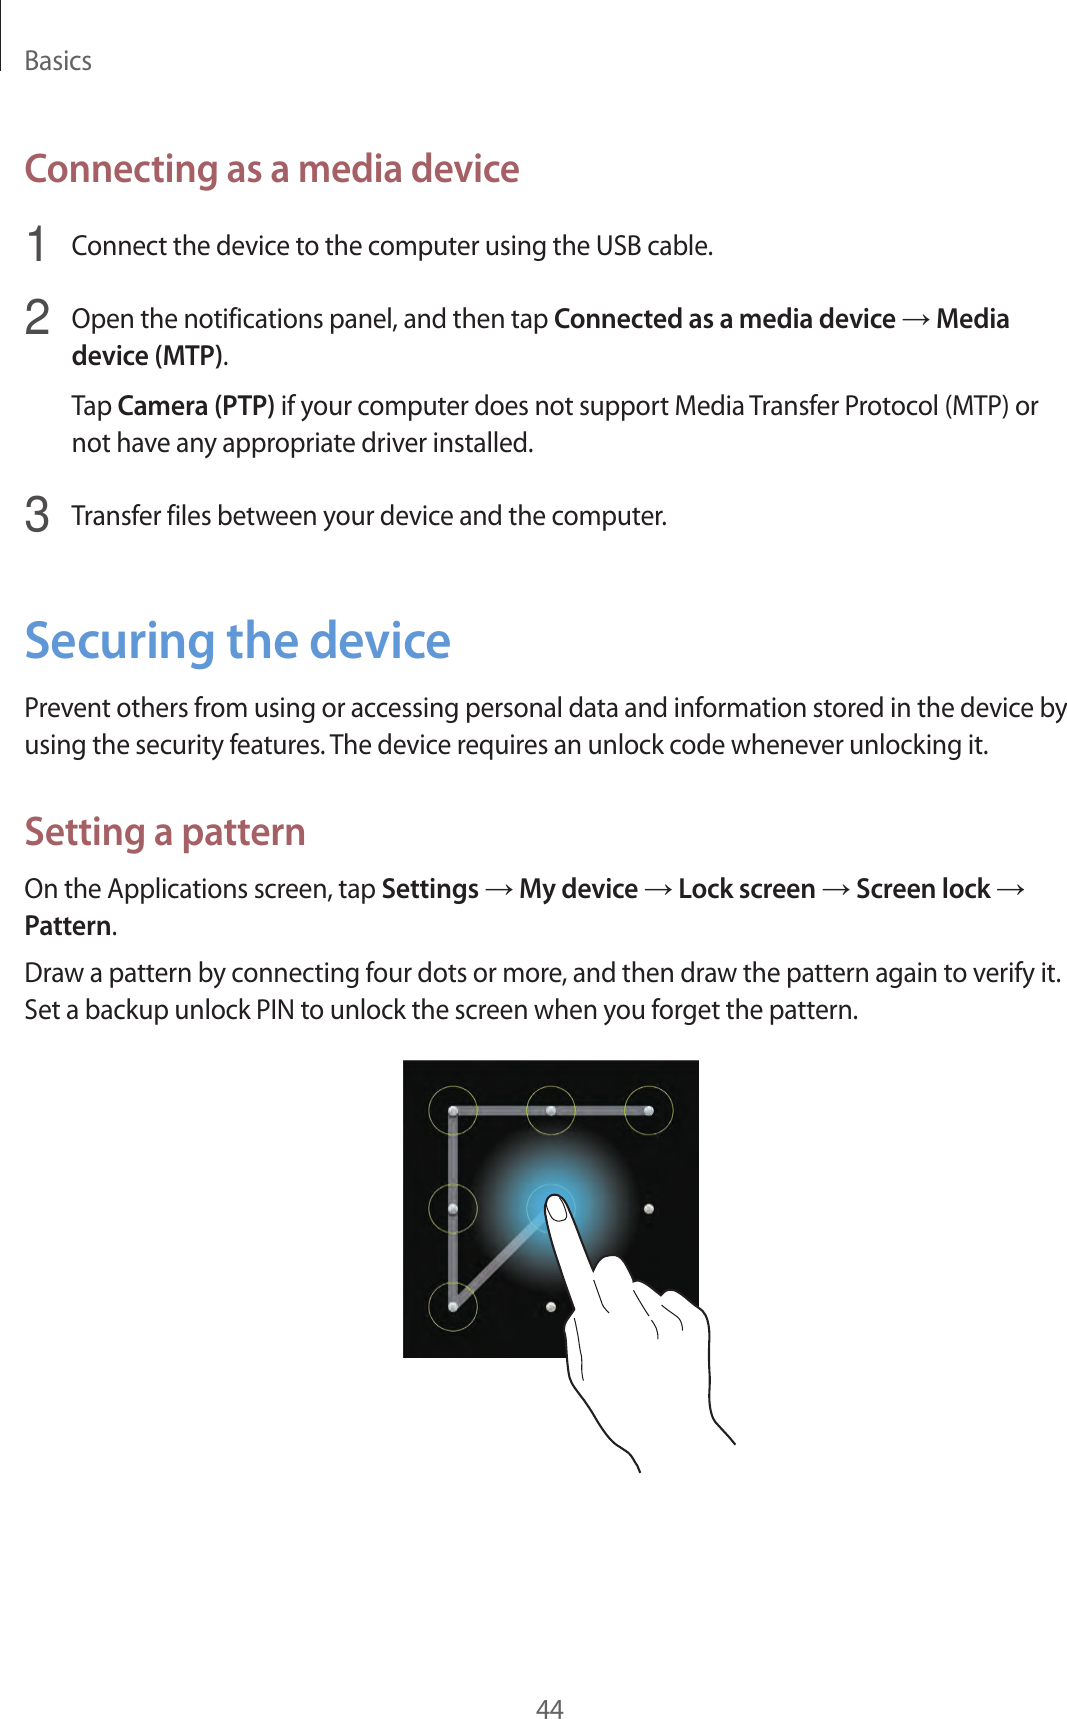 Basics44Connecting as a media device1  Connect the device to the computer using the USB cable.2  Open the notifications panel, and then tap Connected as a media device → Media device (MTP).Tap Camera (PTP) if your computer does not support Media Transfer Protocol (MTP) or not have any appropriate driver installed.3  Transfer files between your device and the computer.Securing the devicePrevent others from using or accessing personal data and information stored in the device by using the security features. The device requires an unlock code whenever unlocking it.Setting a patternOn the Applications screen, tap Settings → My device → Lock screen → Screen lock → Pattern.Draw a pattern by connecting four dots or more, and then draw the pattern again to verify it. Set a backup unlock PIN to unlock the screen when you forget the pattern.